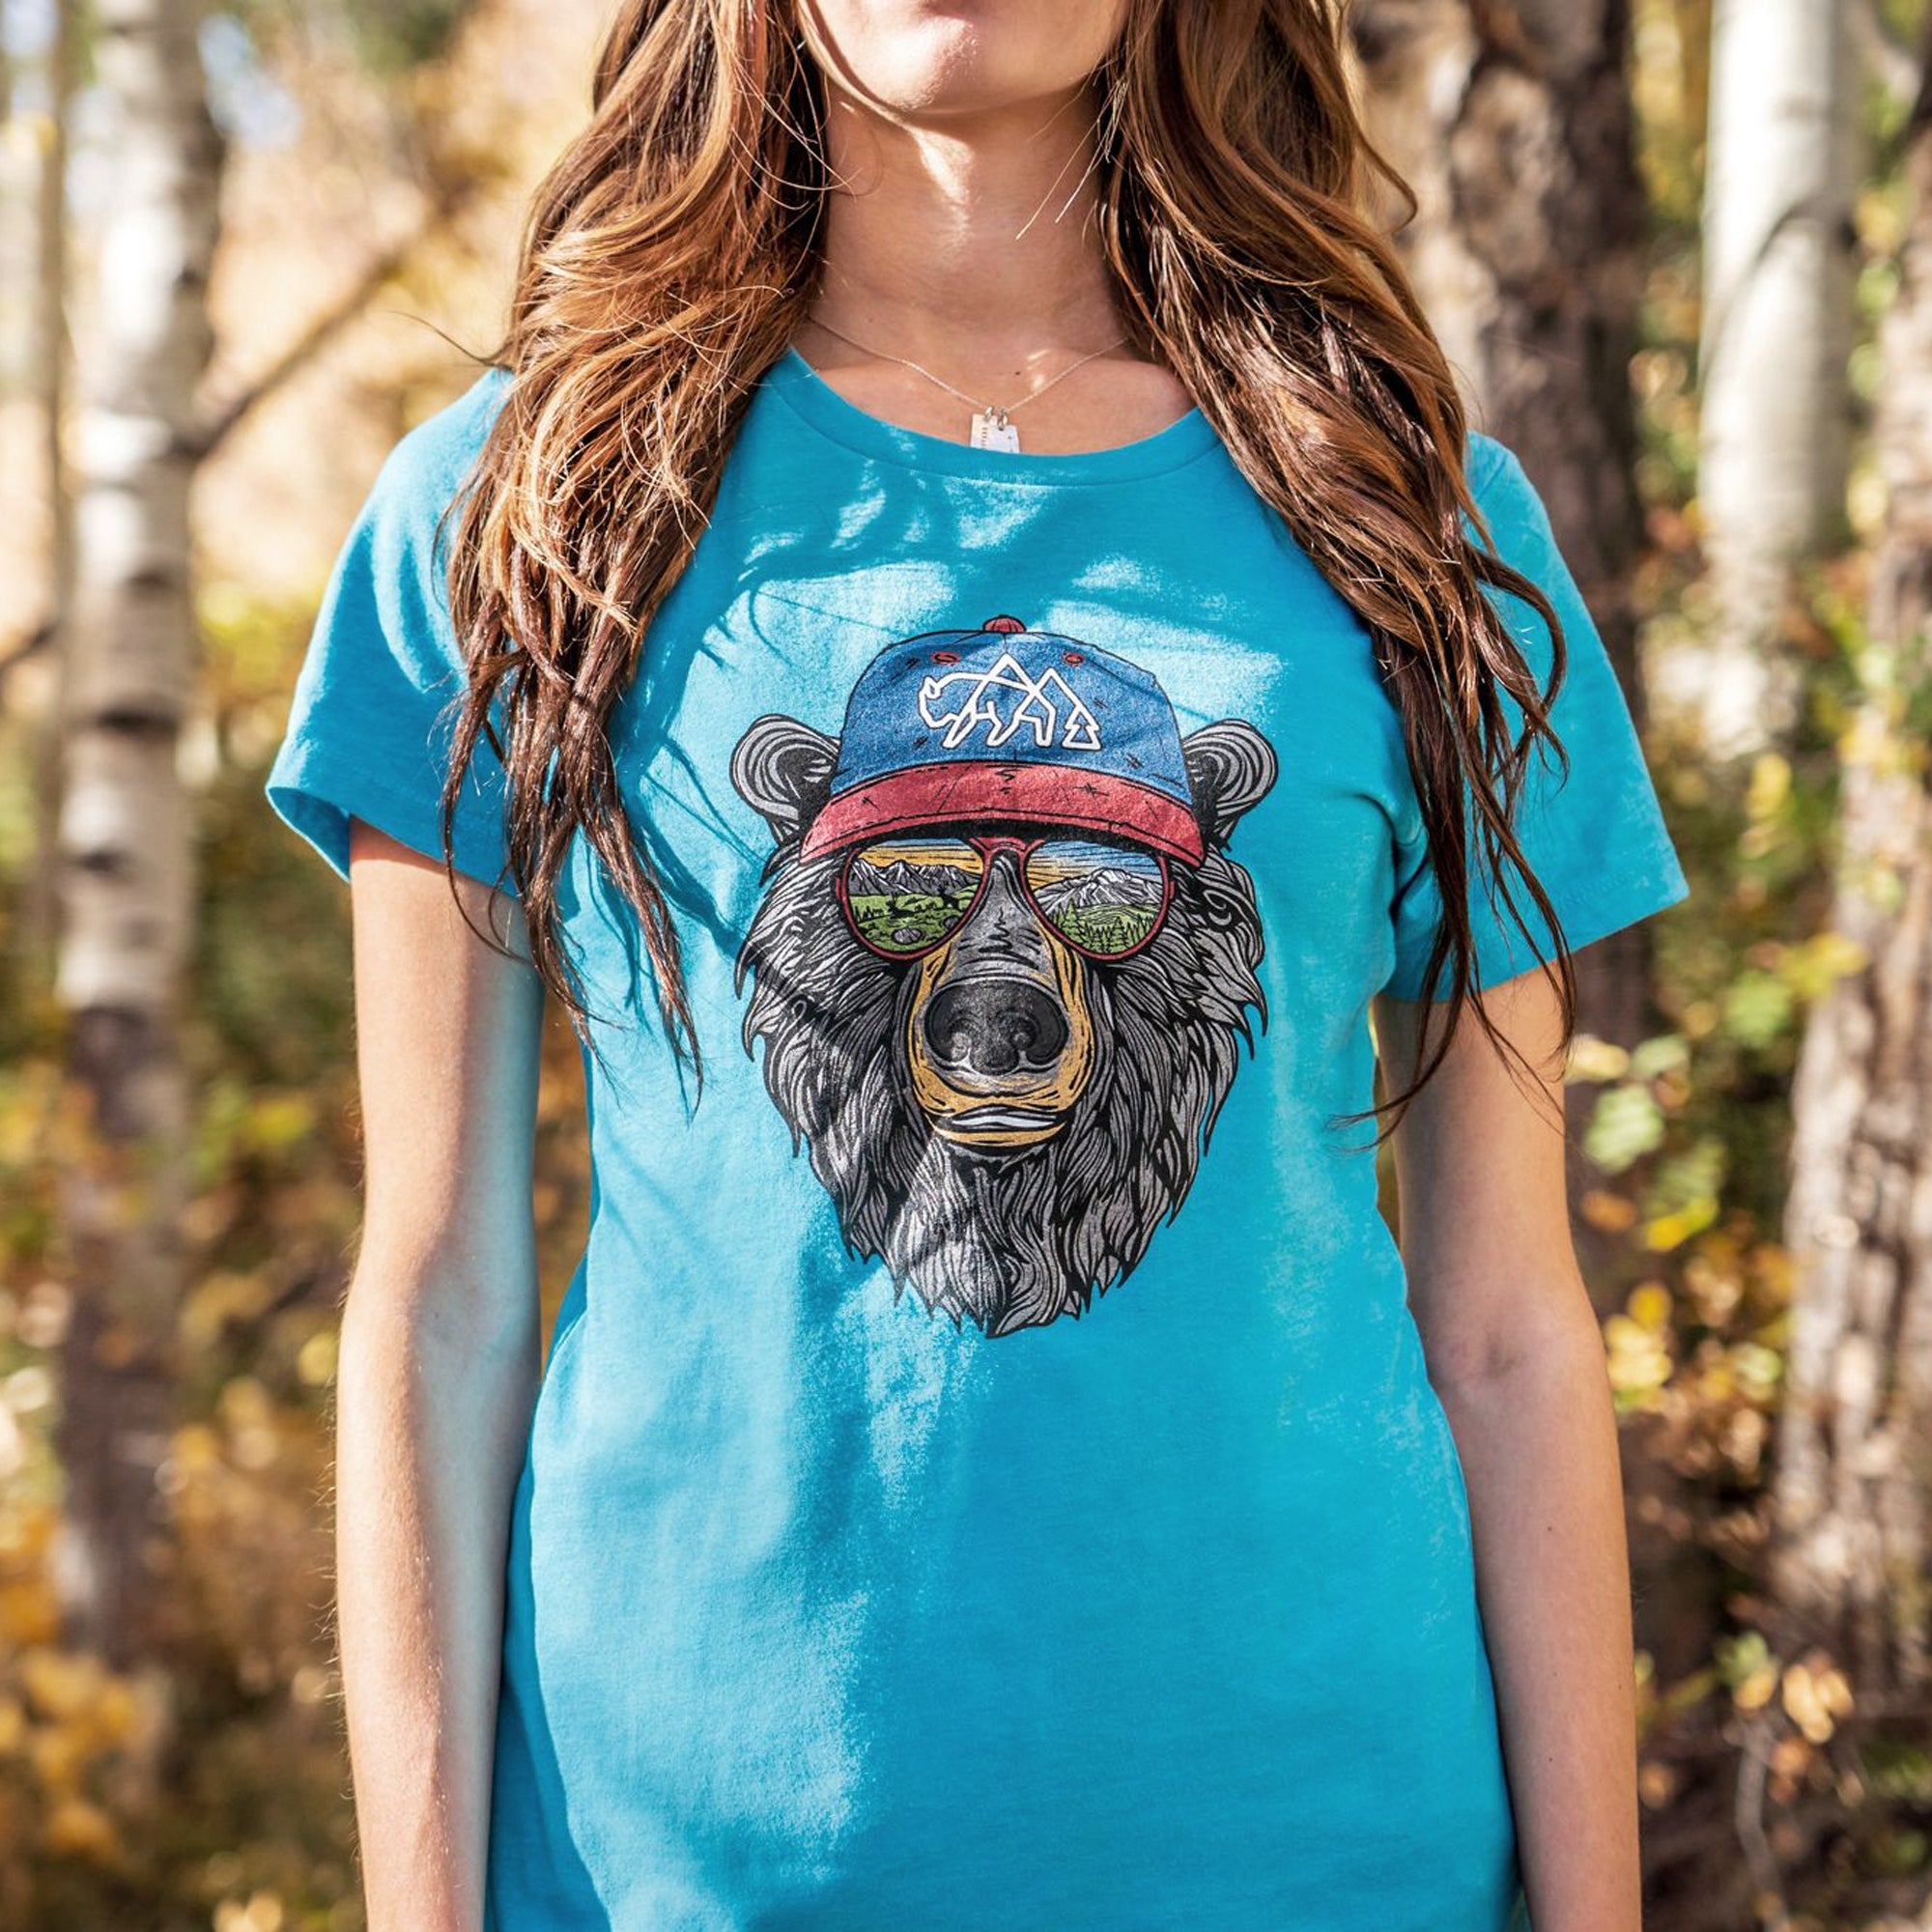 Miami Vice Bear Women's Fitted T-Shirt